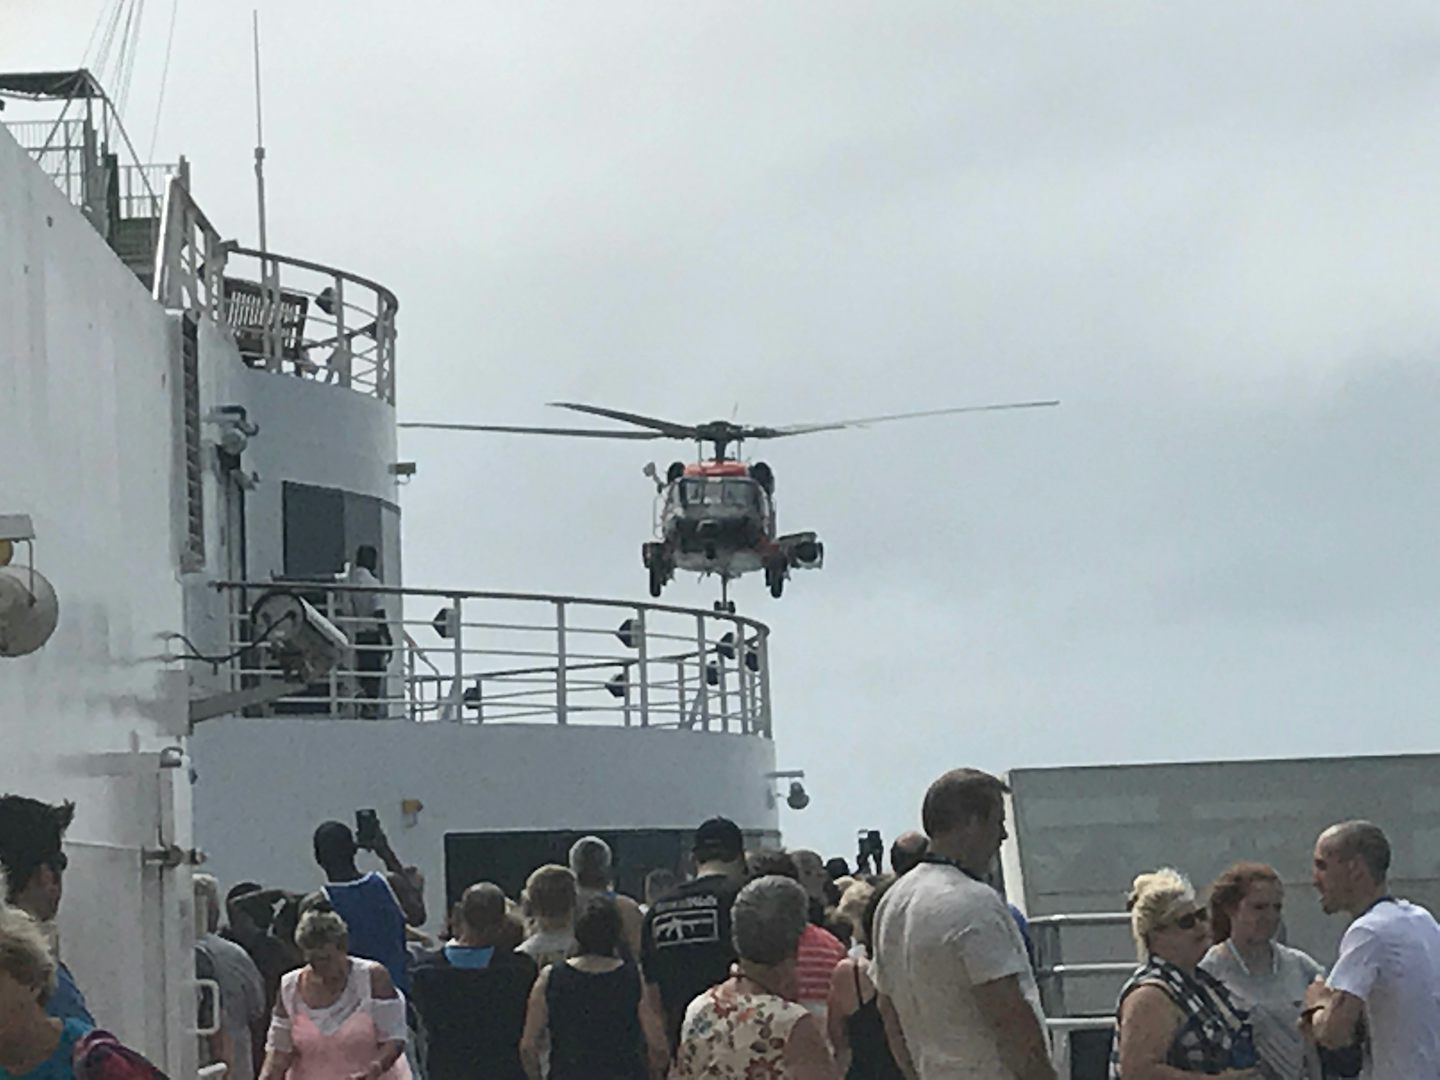 Medical airlift on 9/25/2017 at Serenity deck